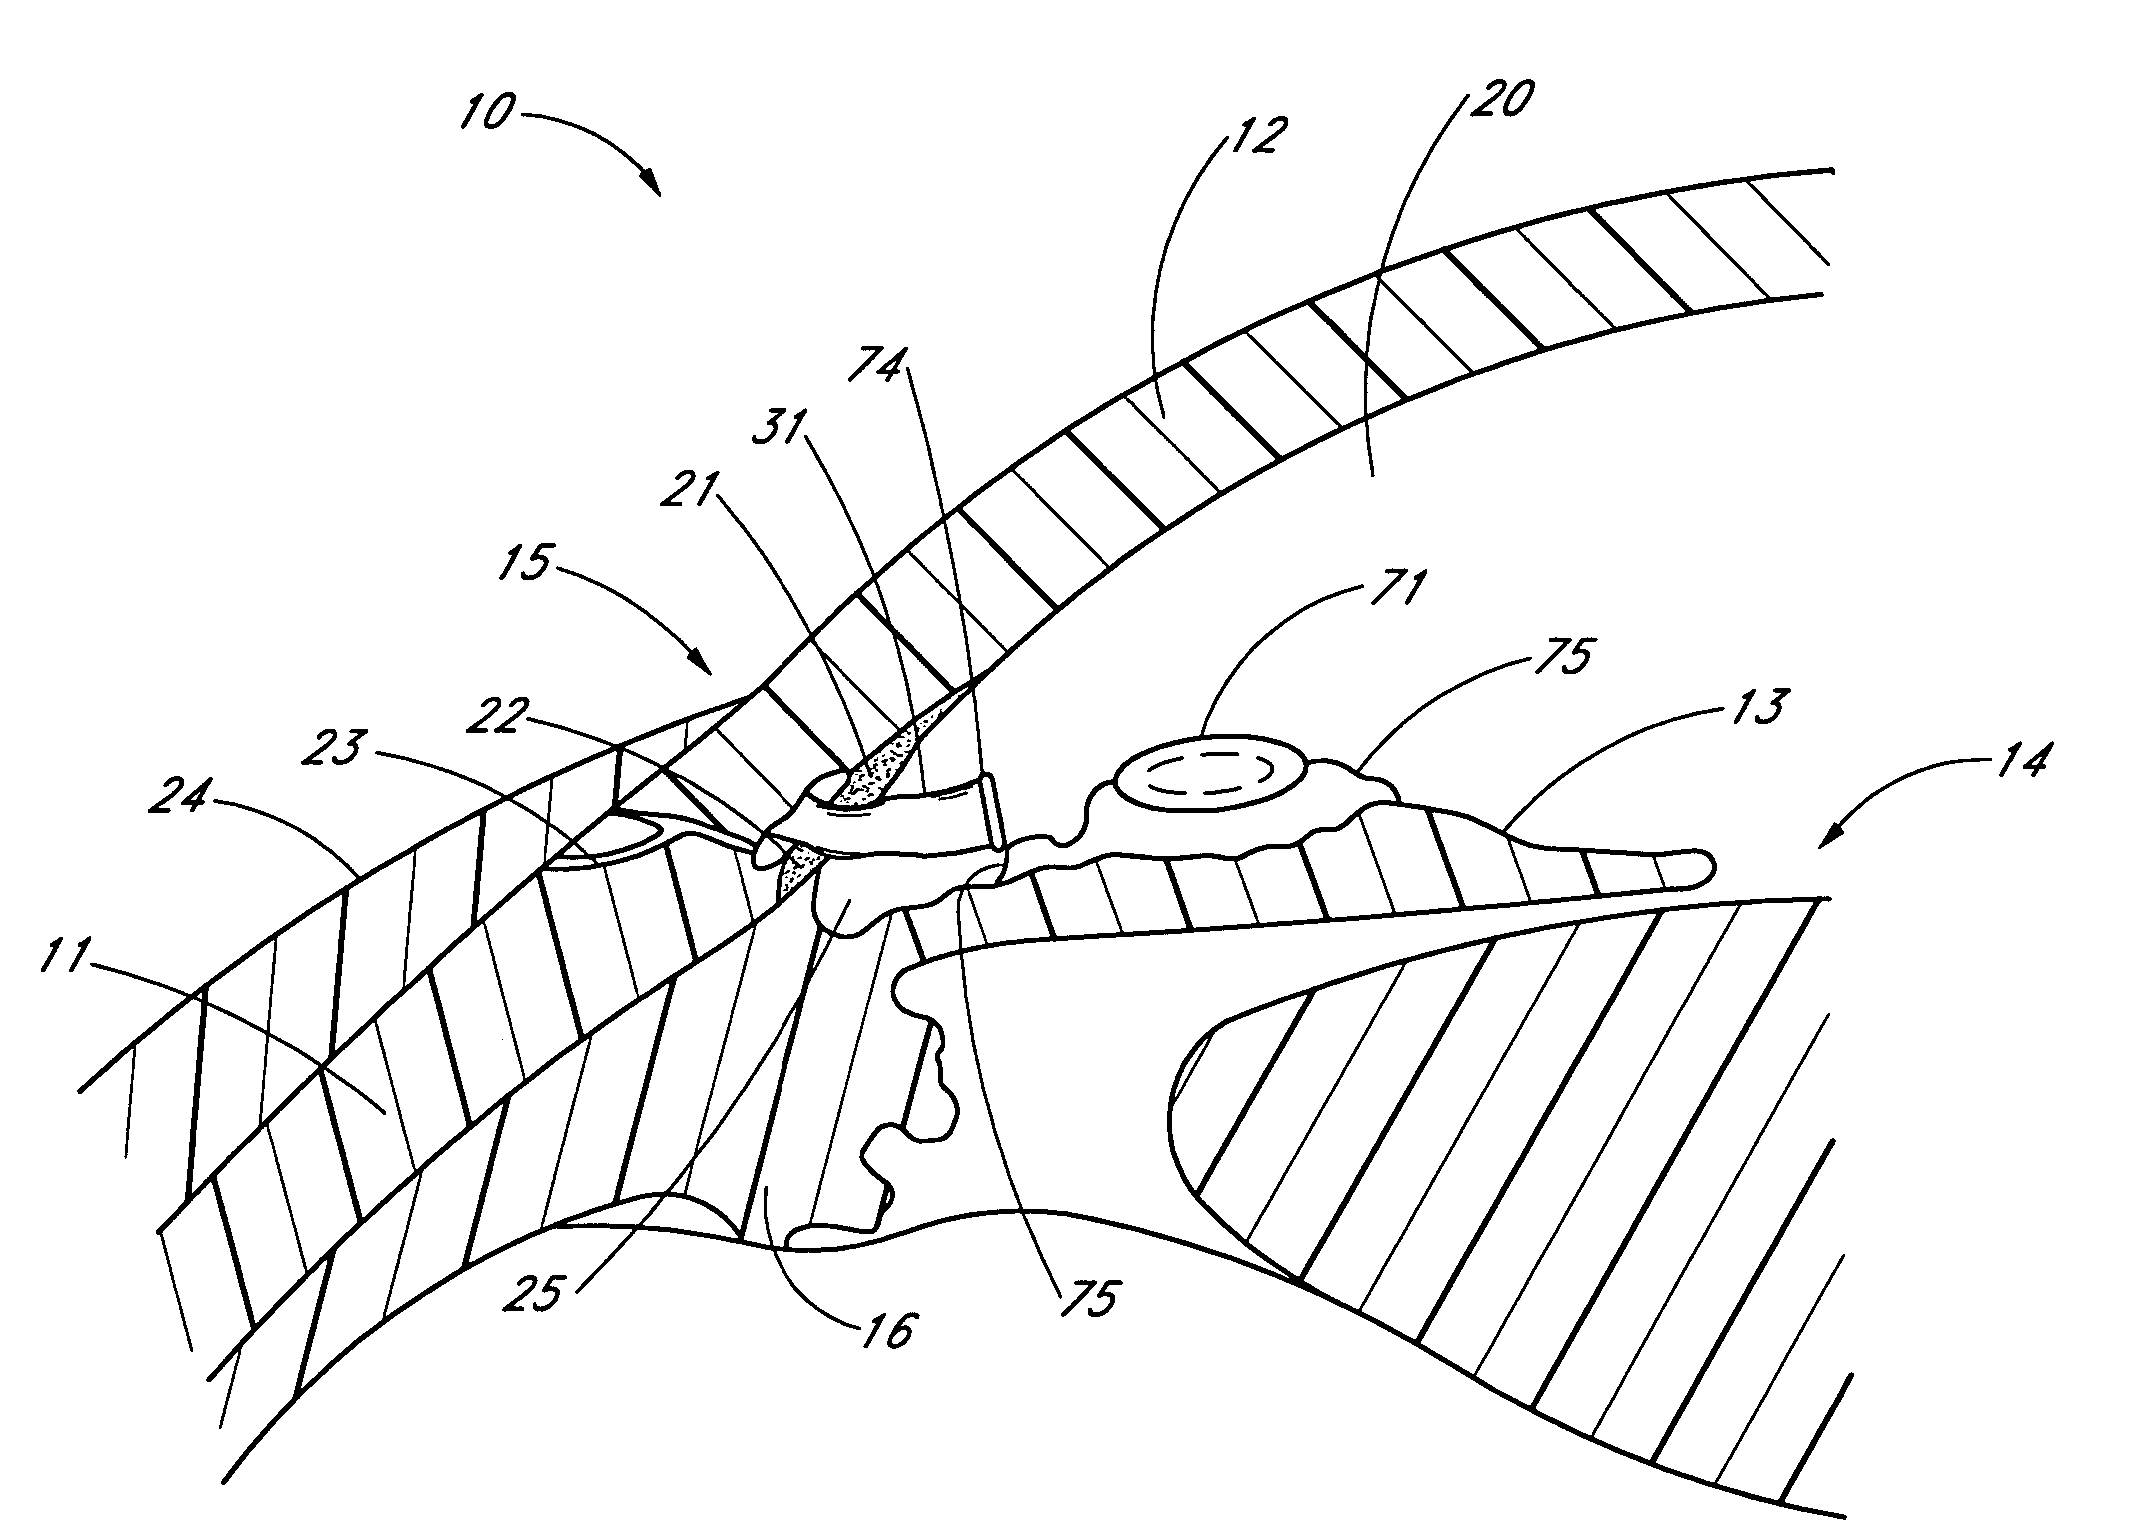 Implant with intraocular pressure sensor for glaucoma treatment